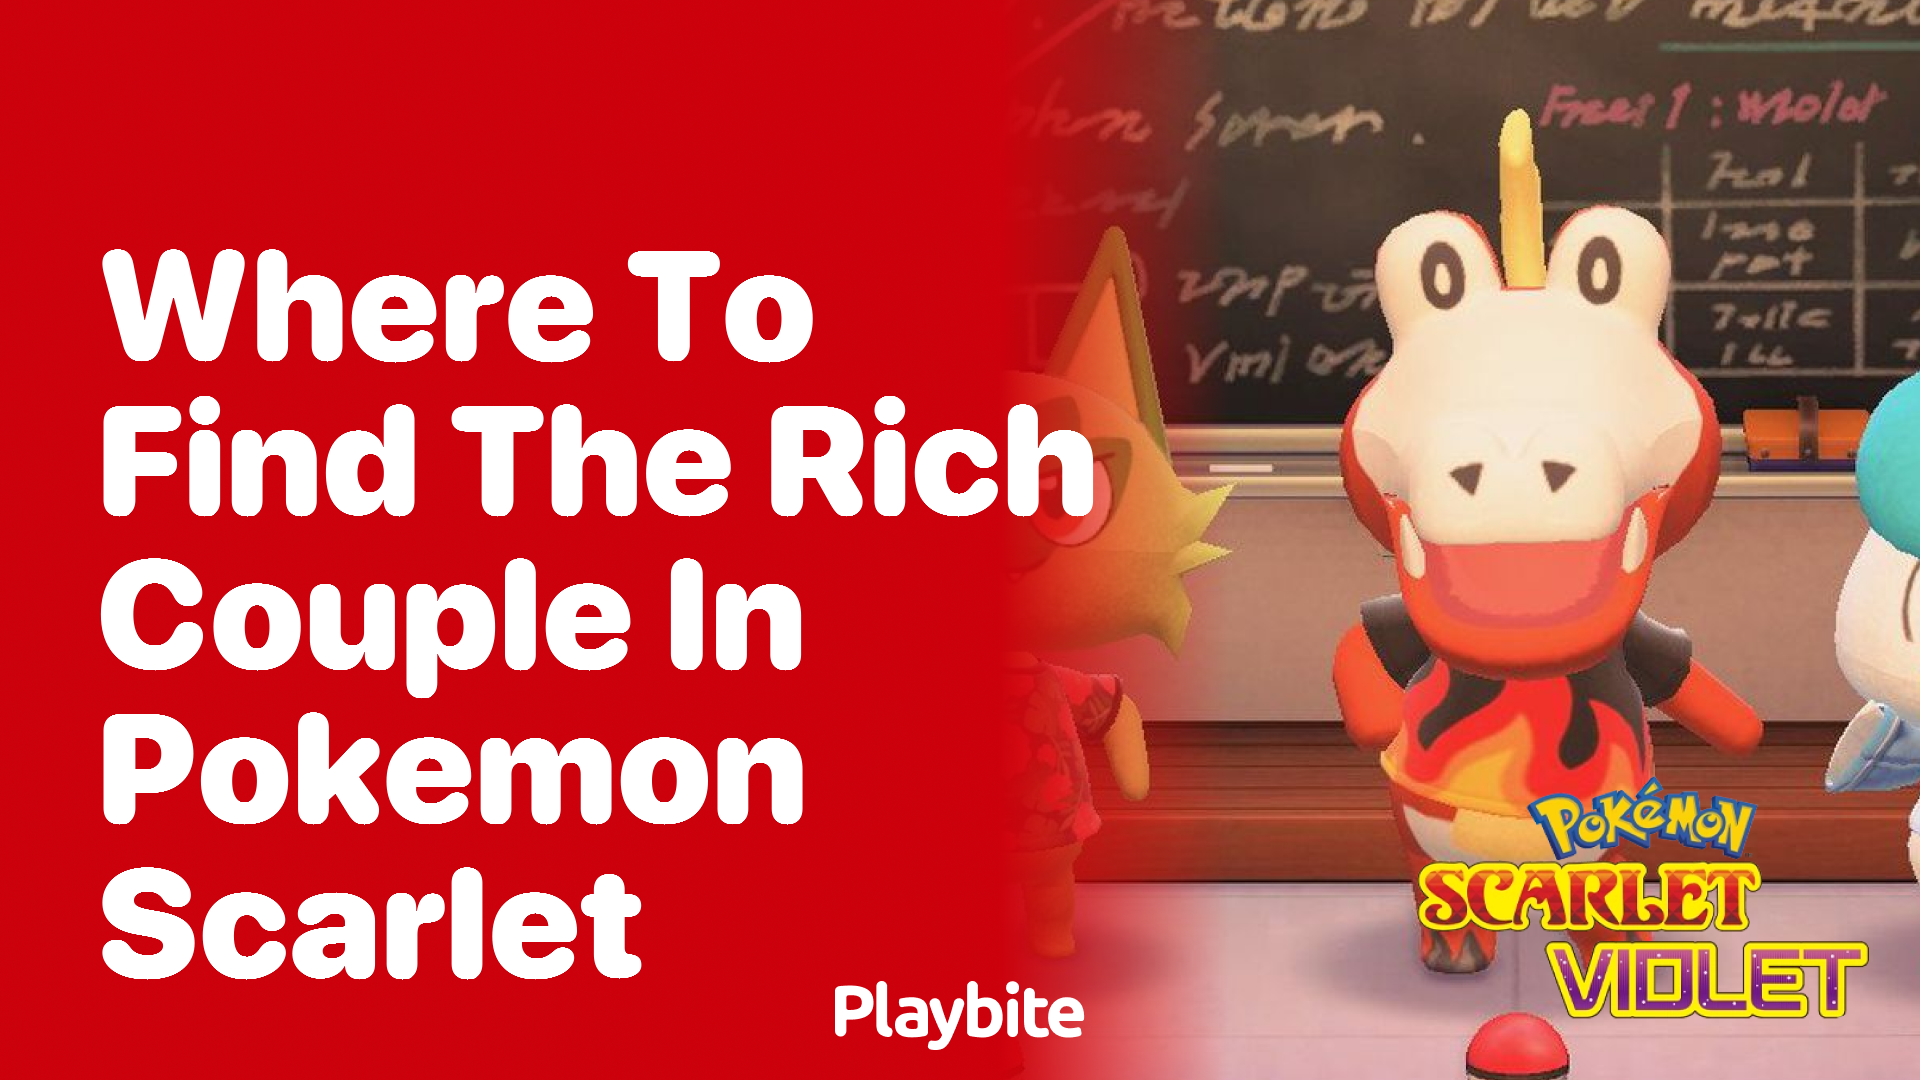 Where to find the rich couple in Pokemon Scarlet?